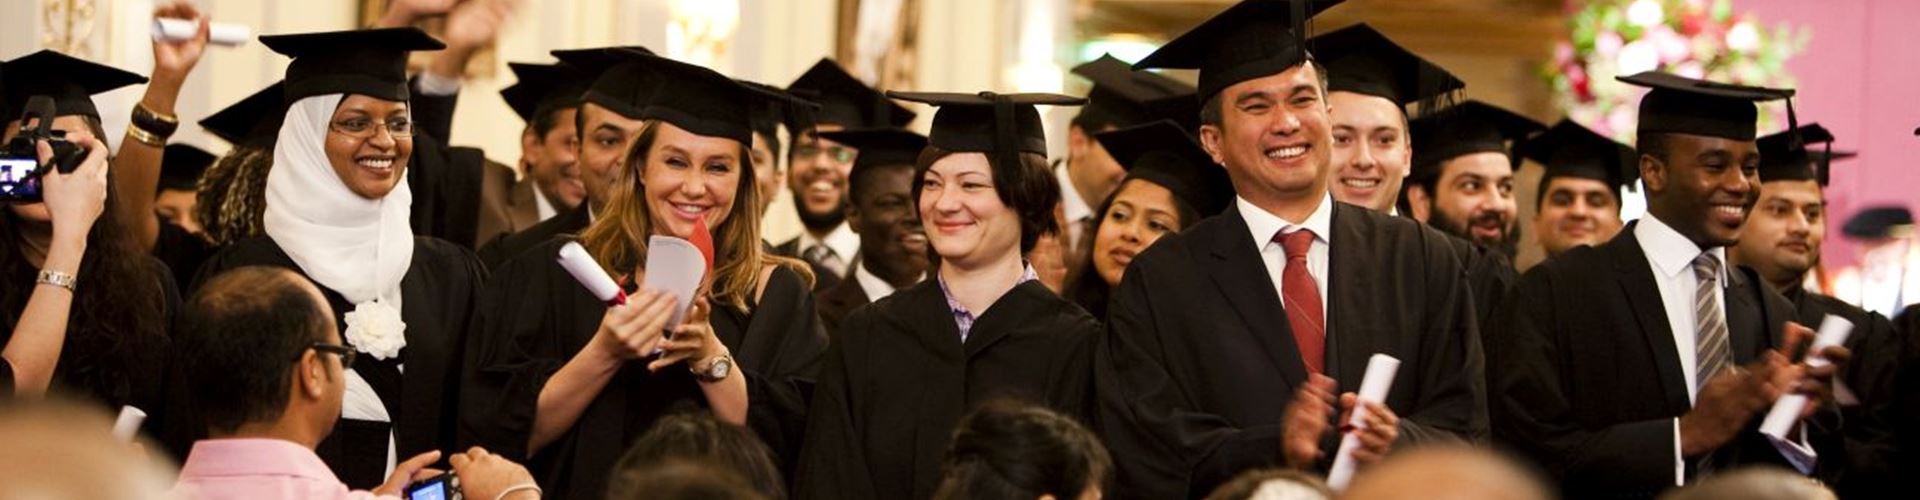 1-in-5 UK graduates become millionaires, ONS study shows